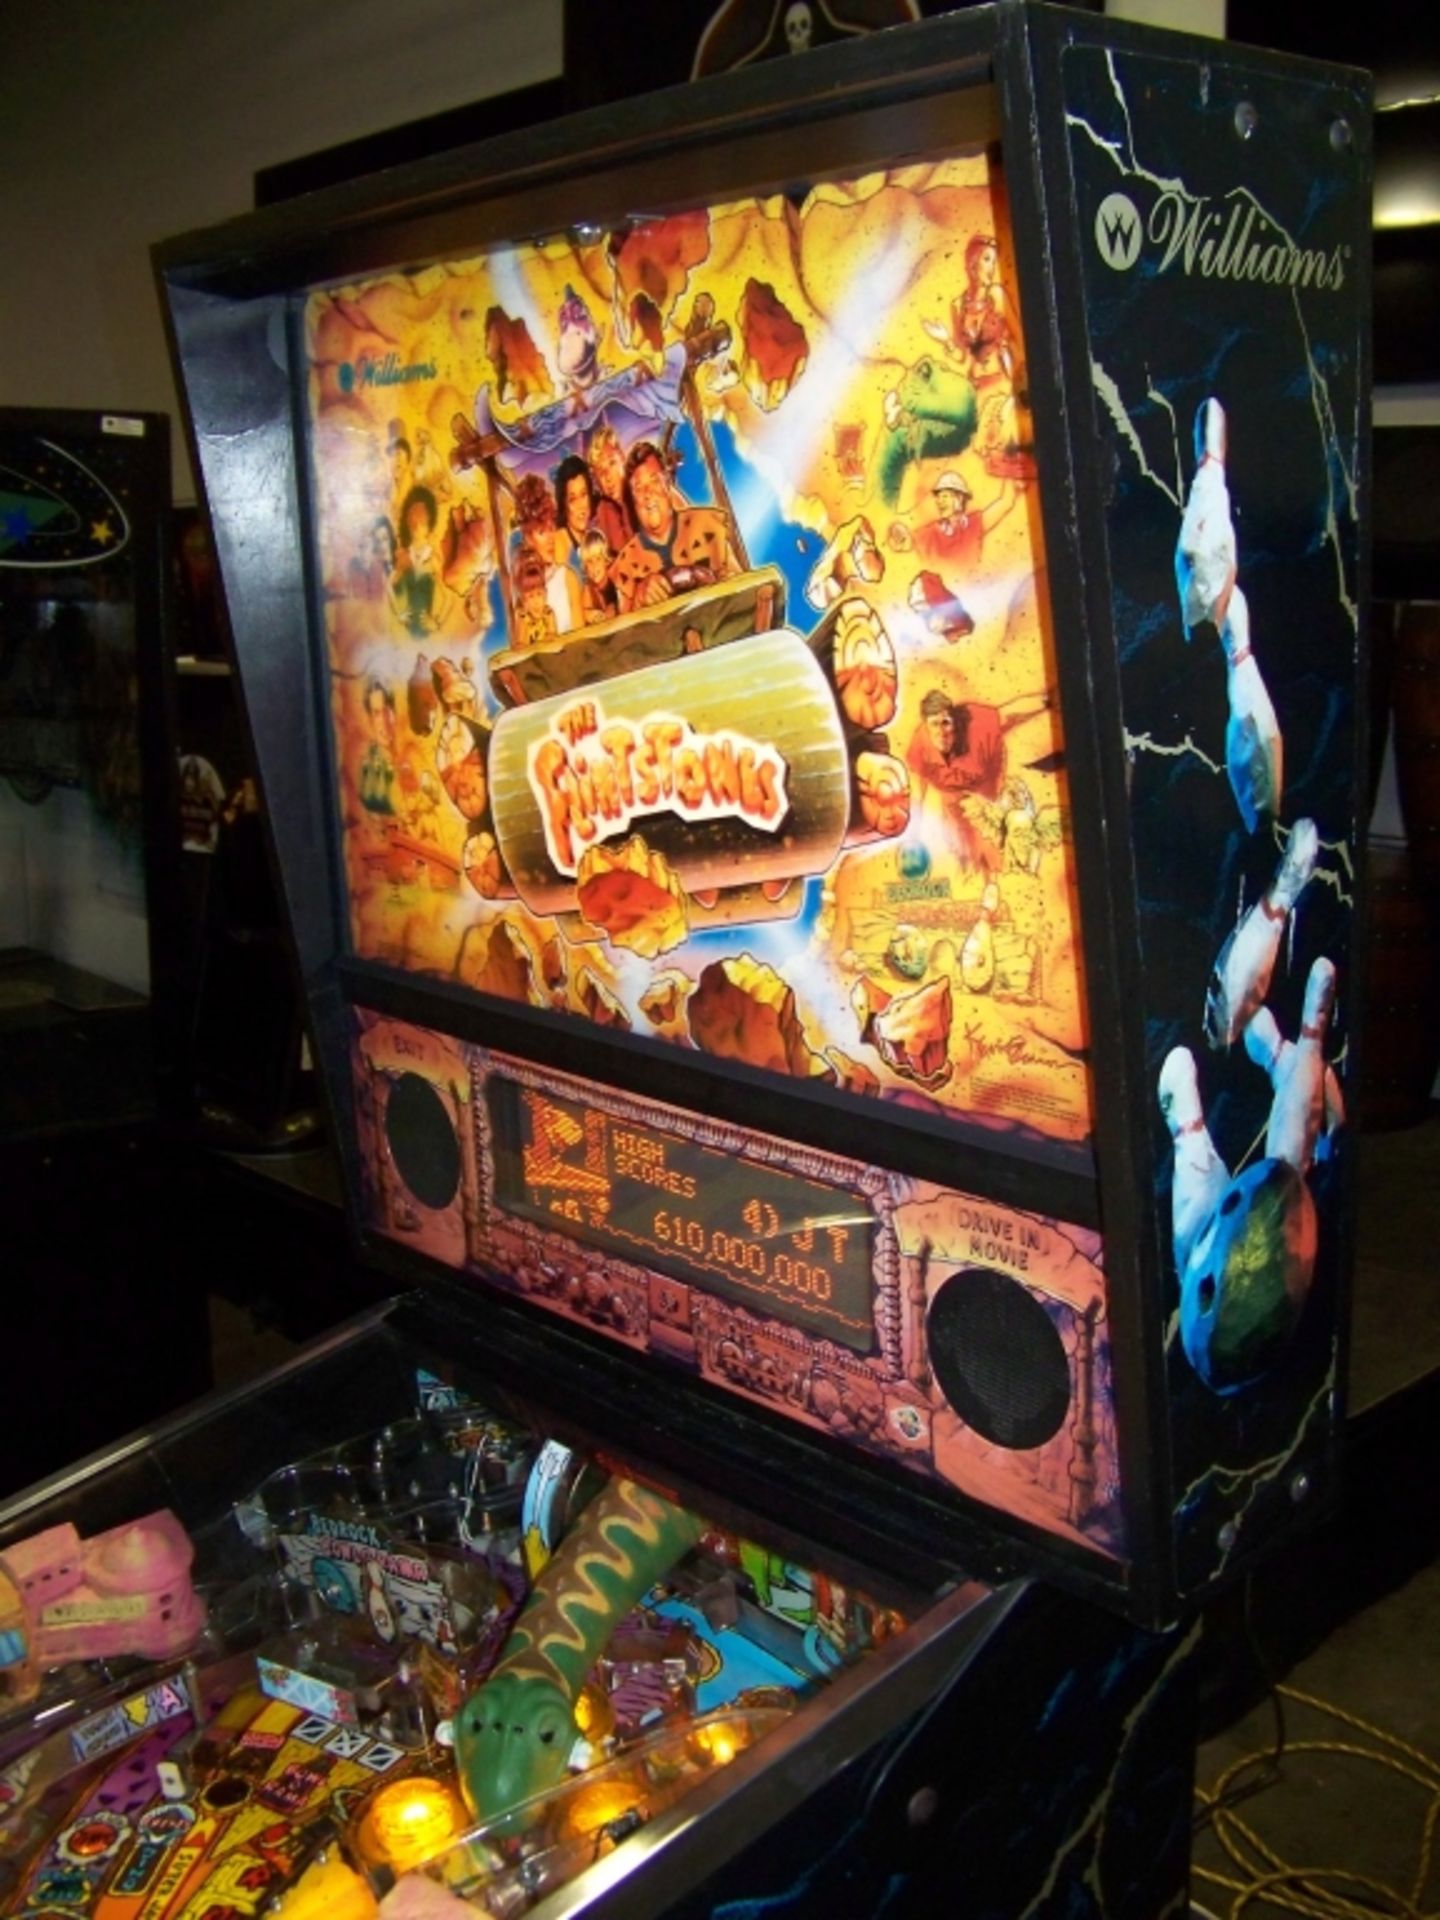 FLINSTONES THE MOVIE PINBALL MACHINE WILLIAMS 1994 Item is in used condition. Evidence of wear and - Image 5 of 11